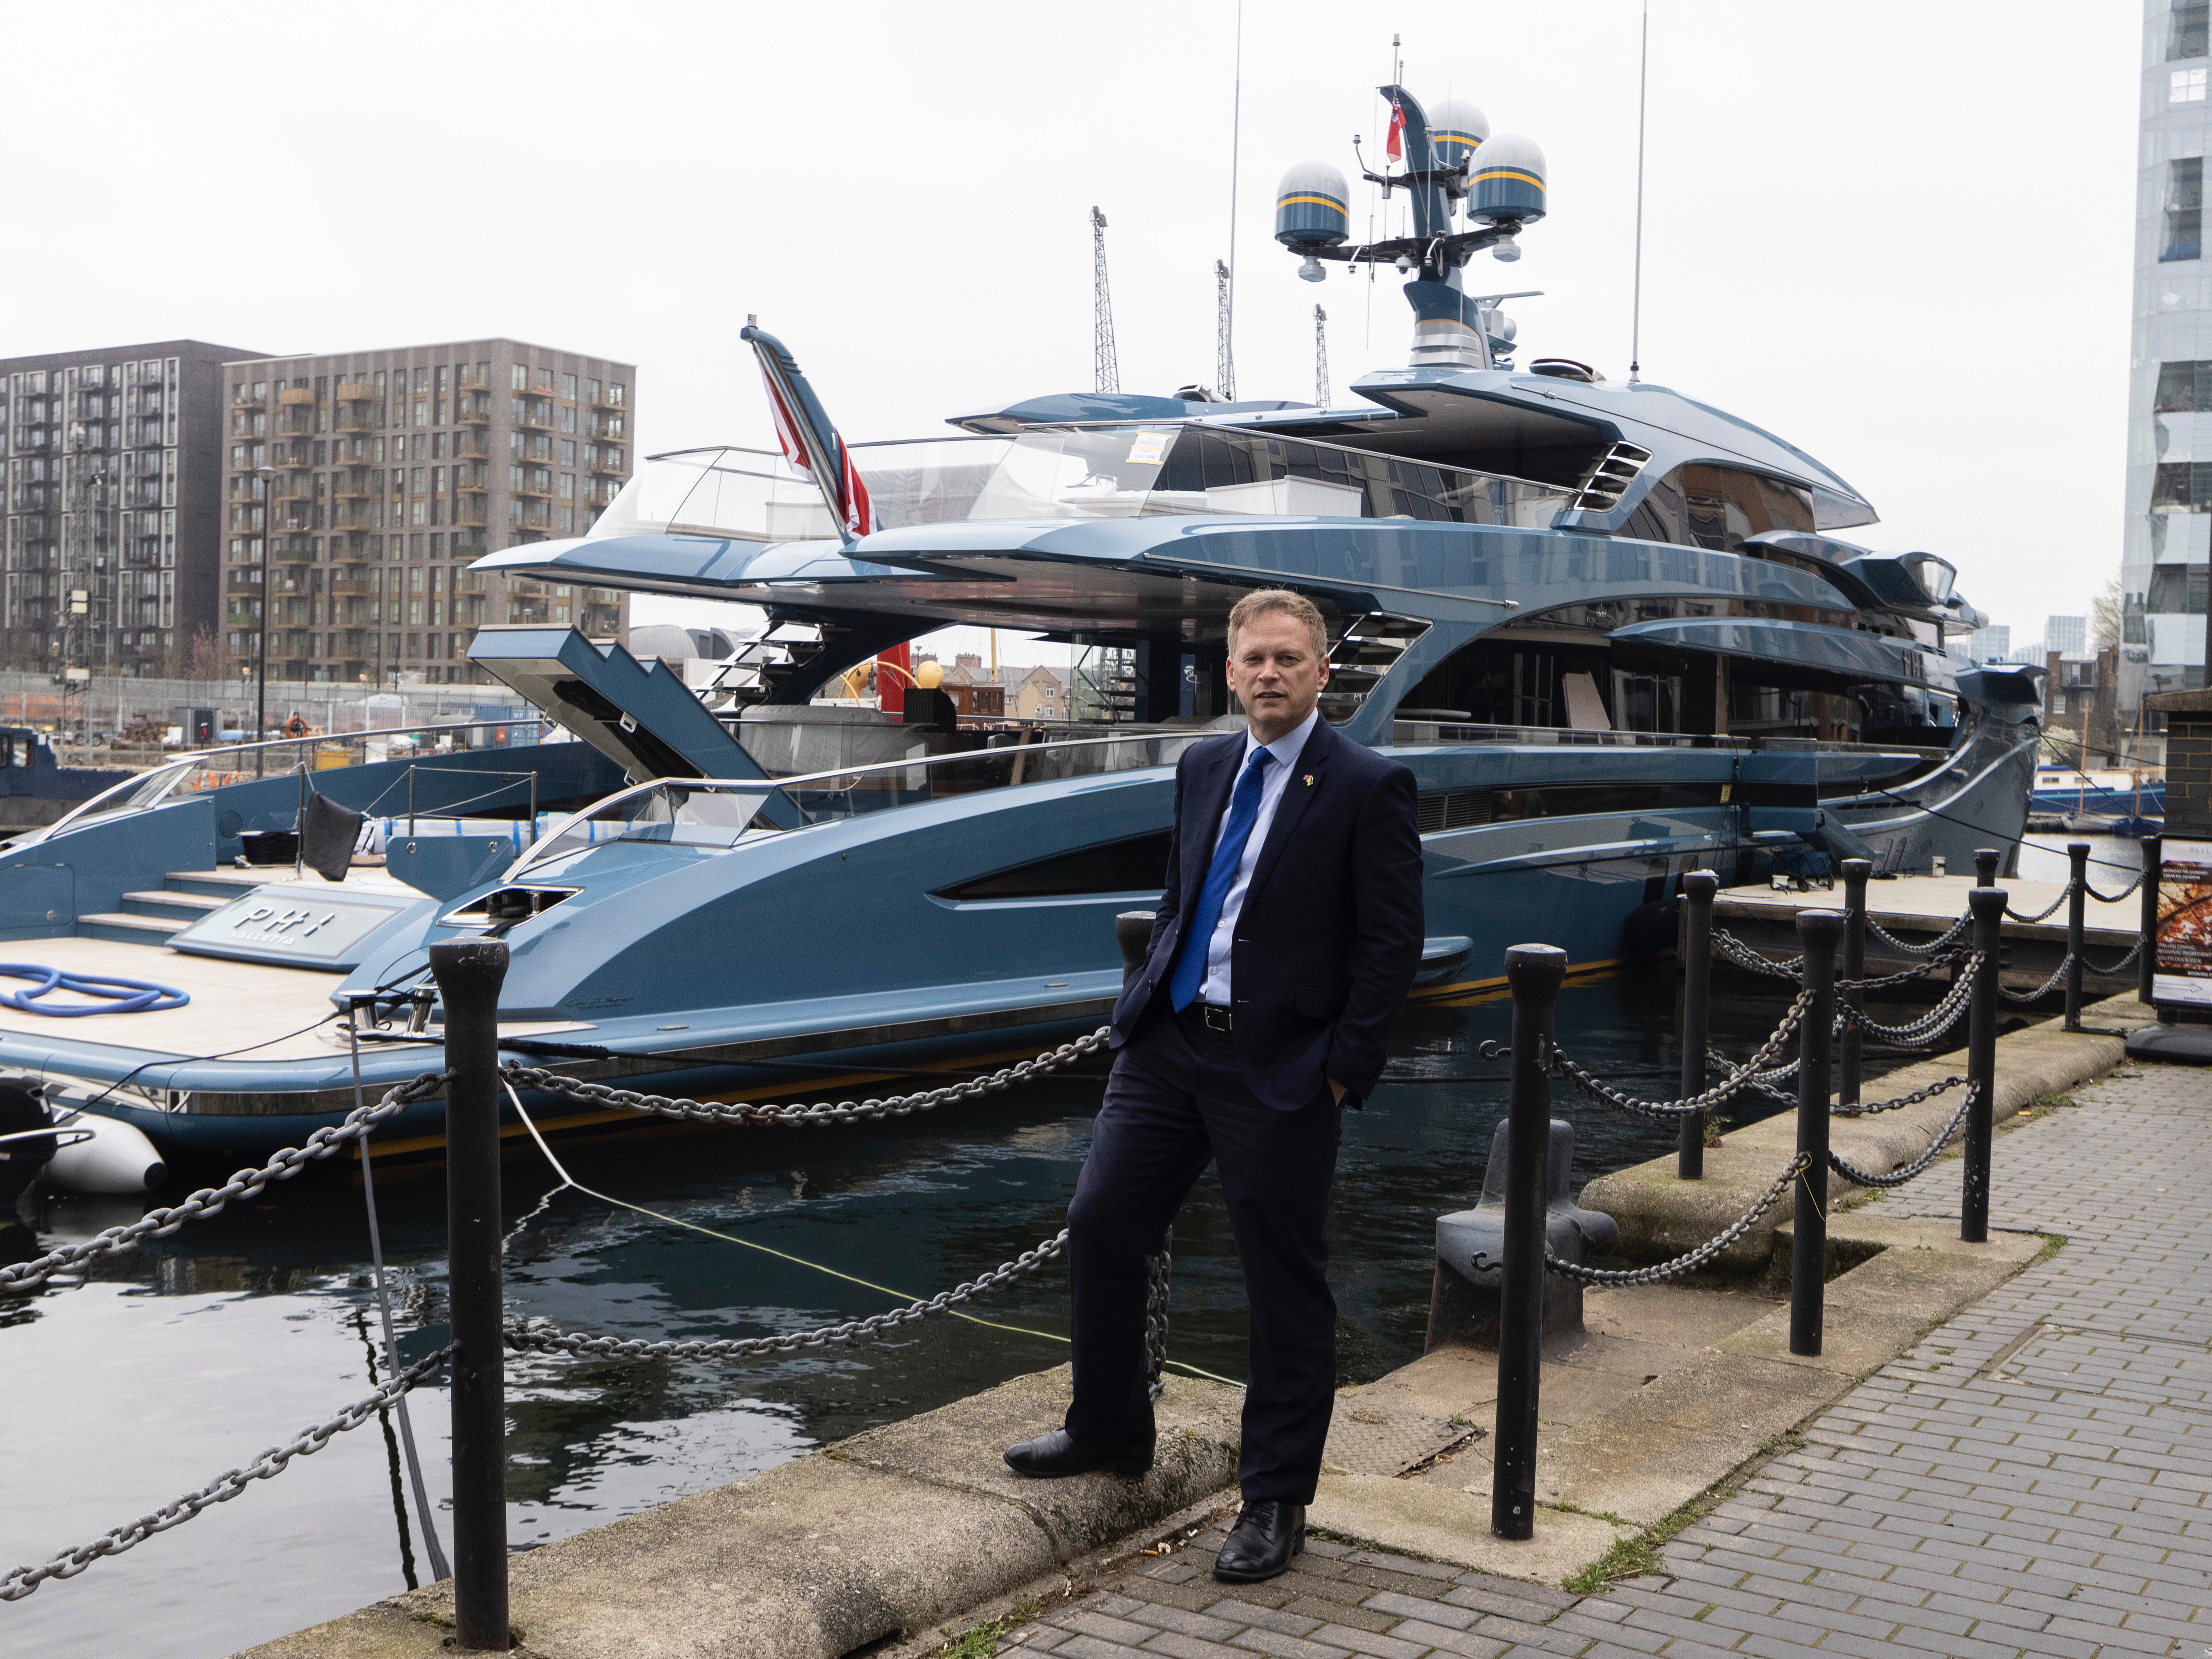 Transport secretary Grant Shapps posing in front of the detained superyacht Phi